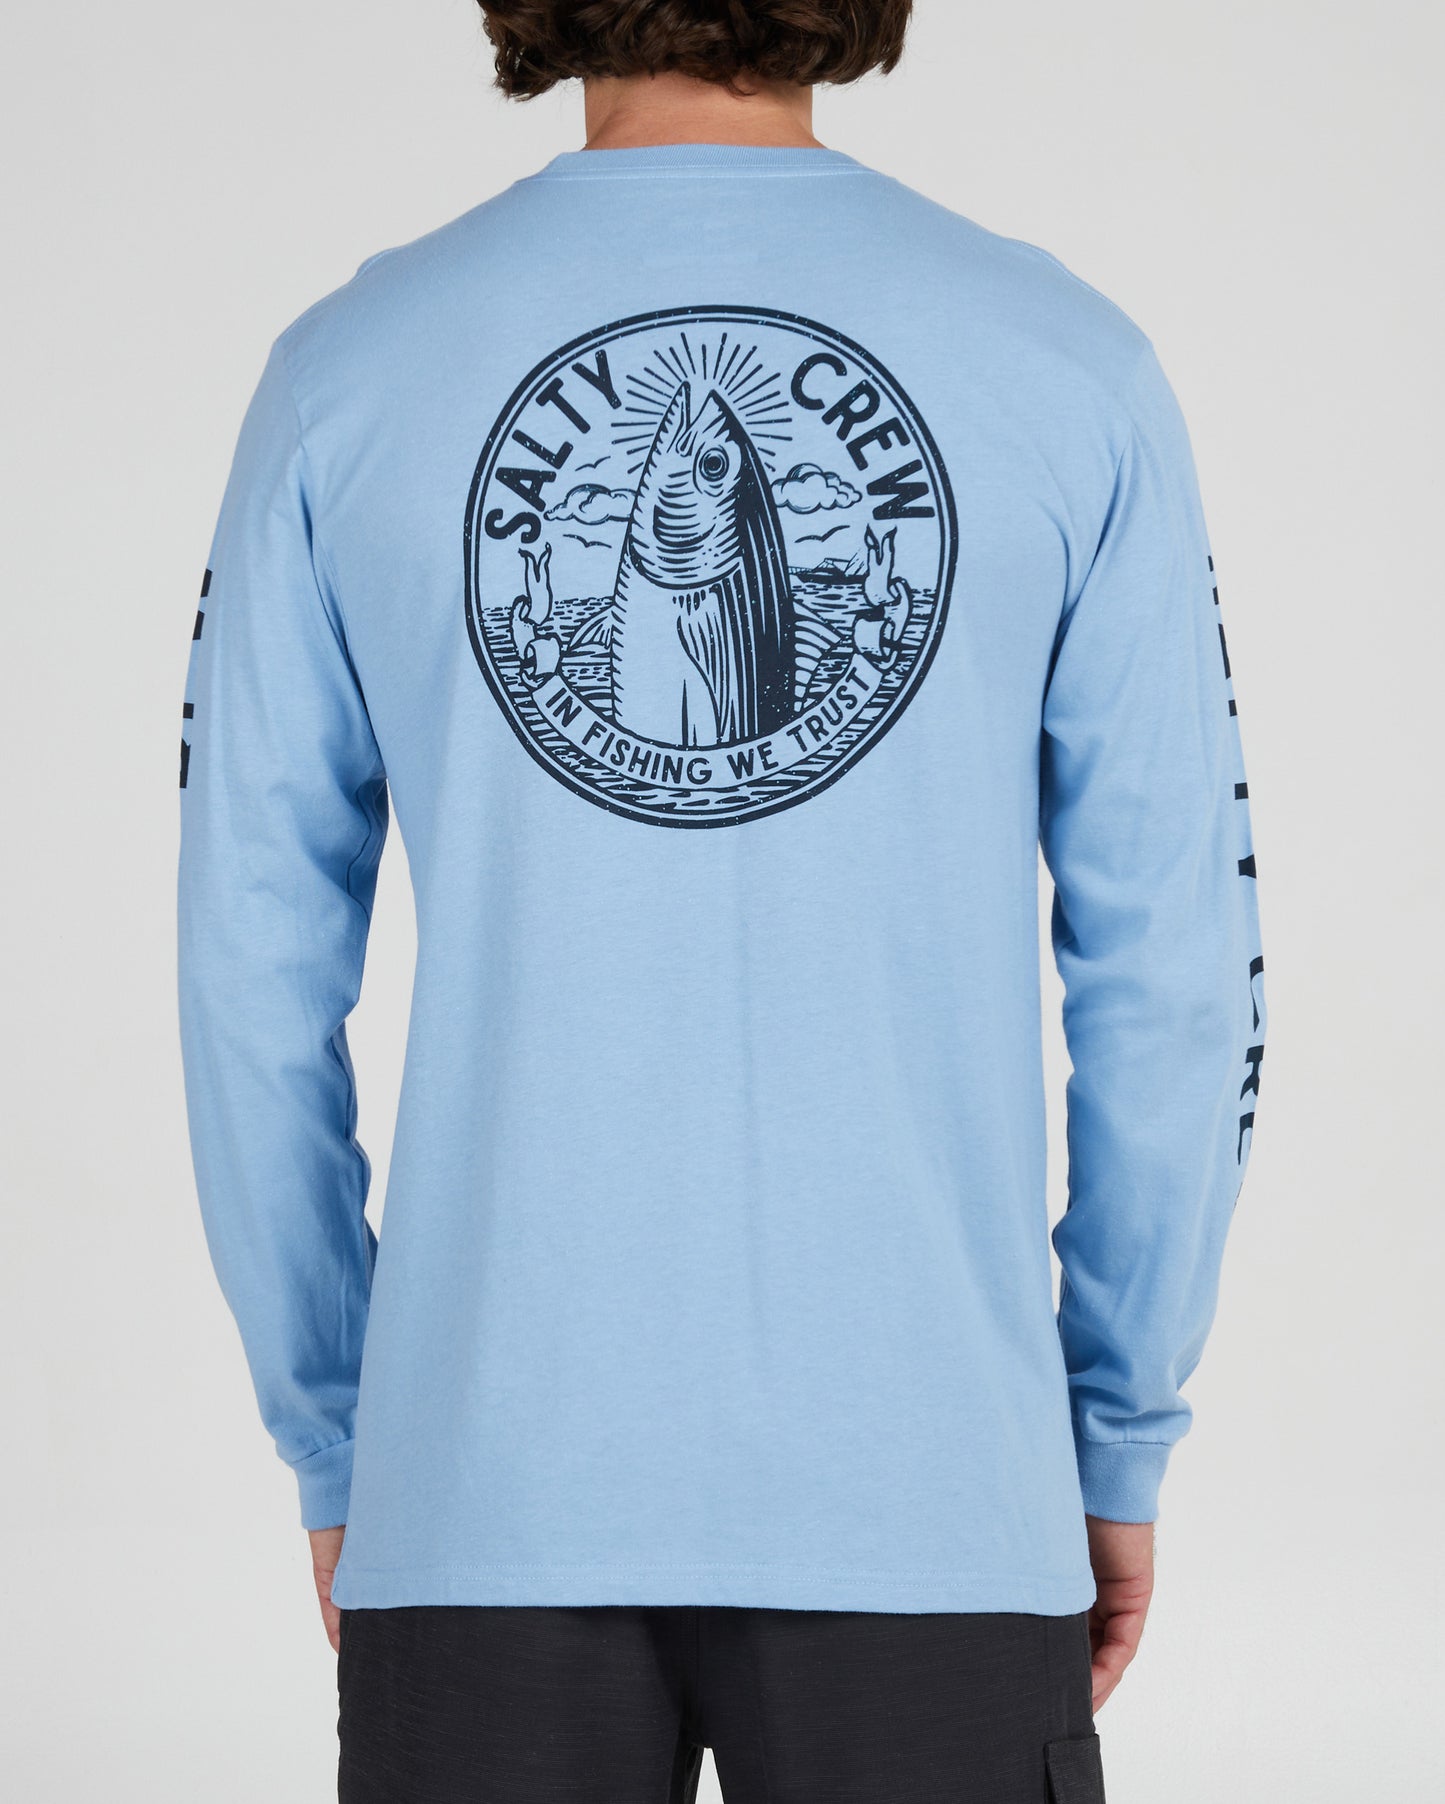 On body back of the In Fishing We Trust Marine Blue L/S Premium Tee